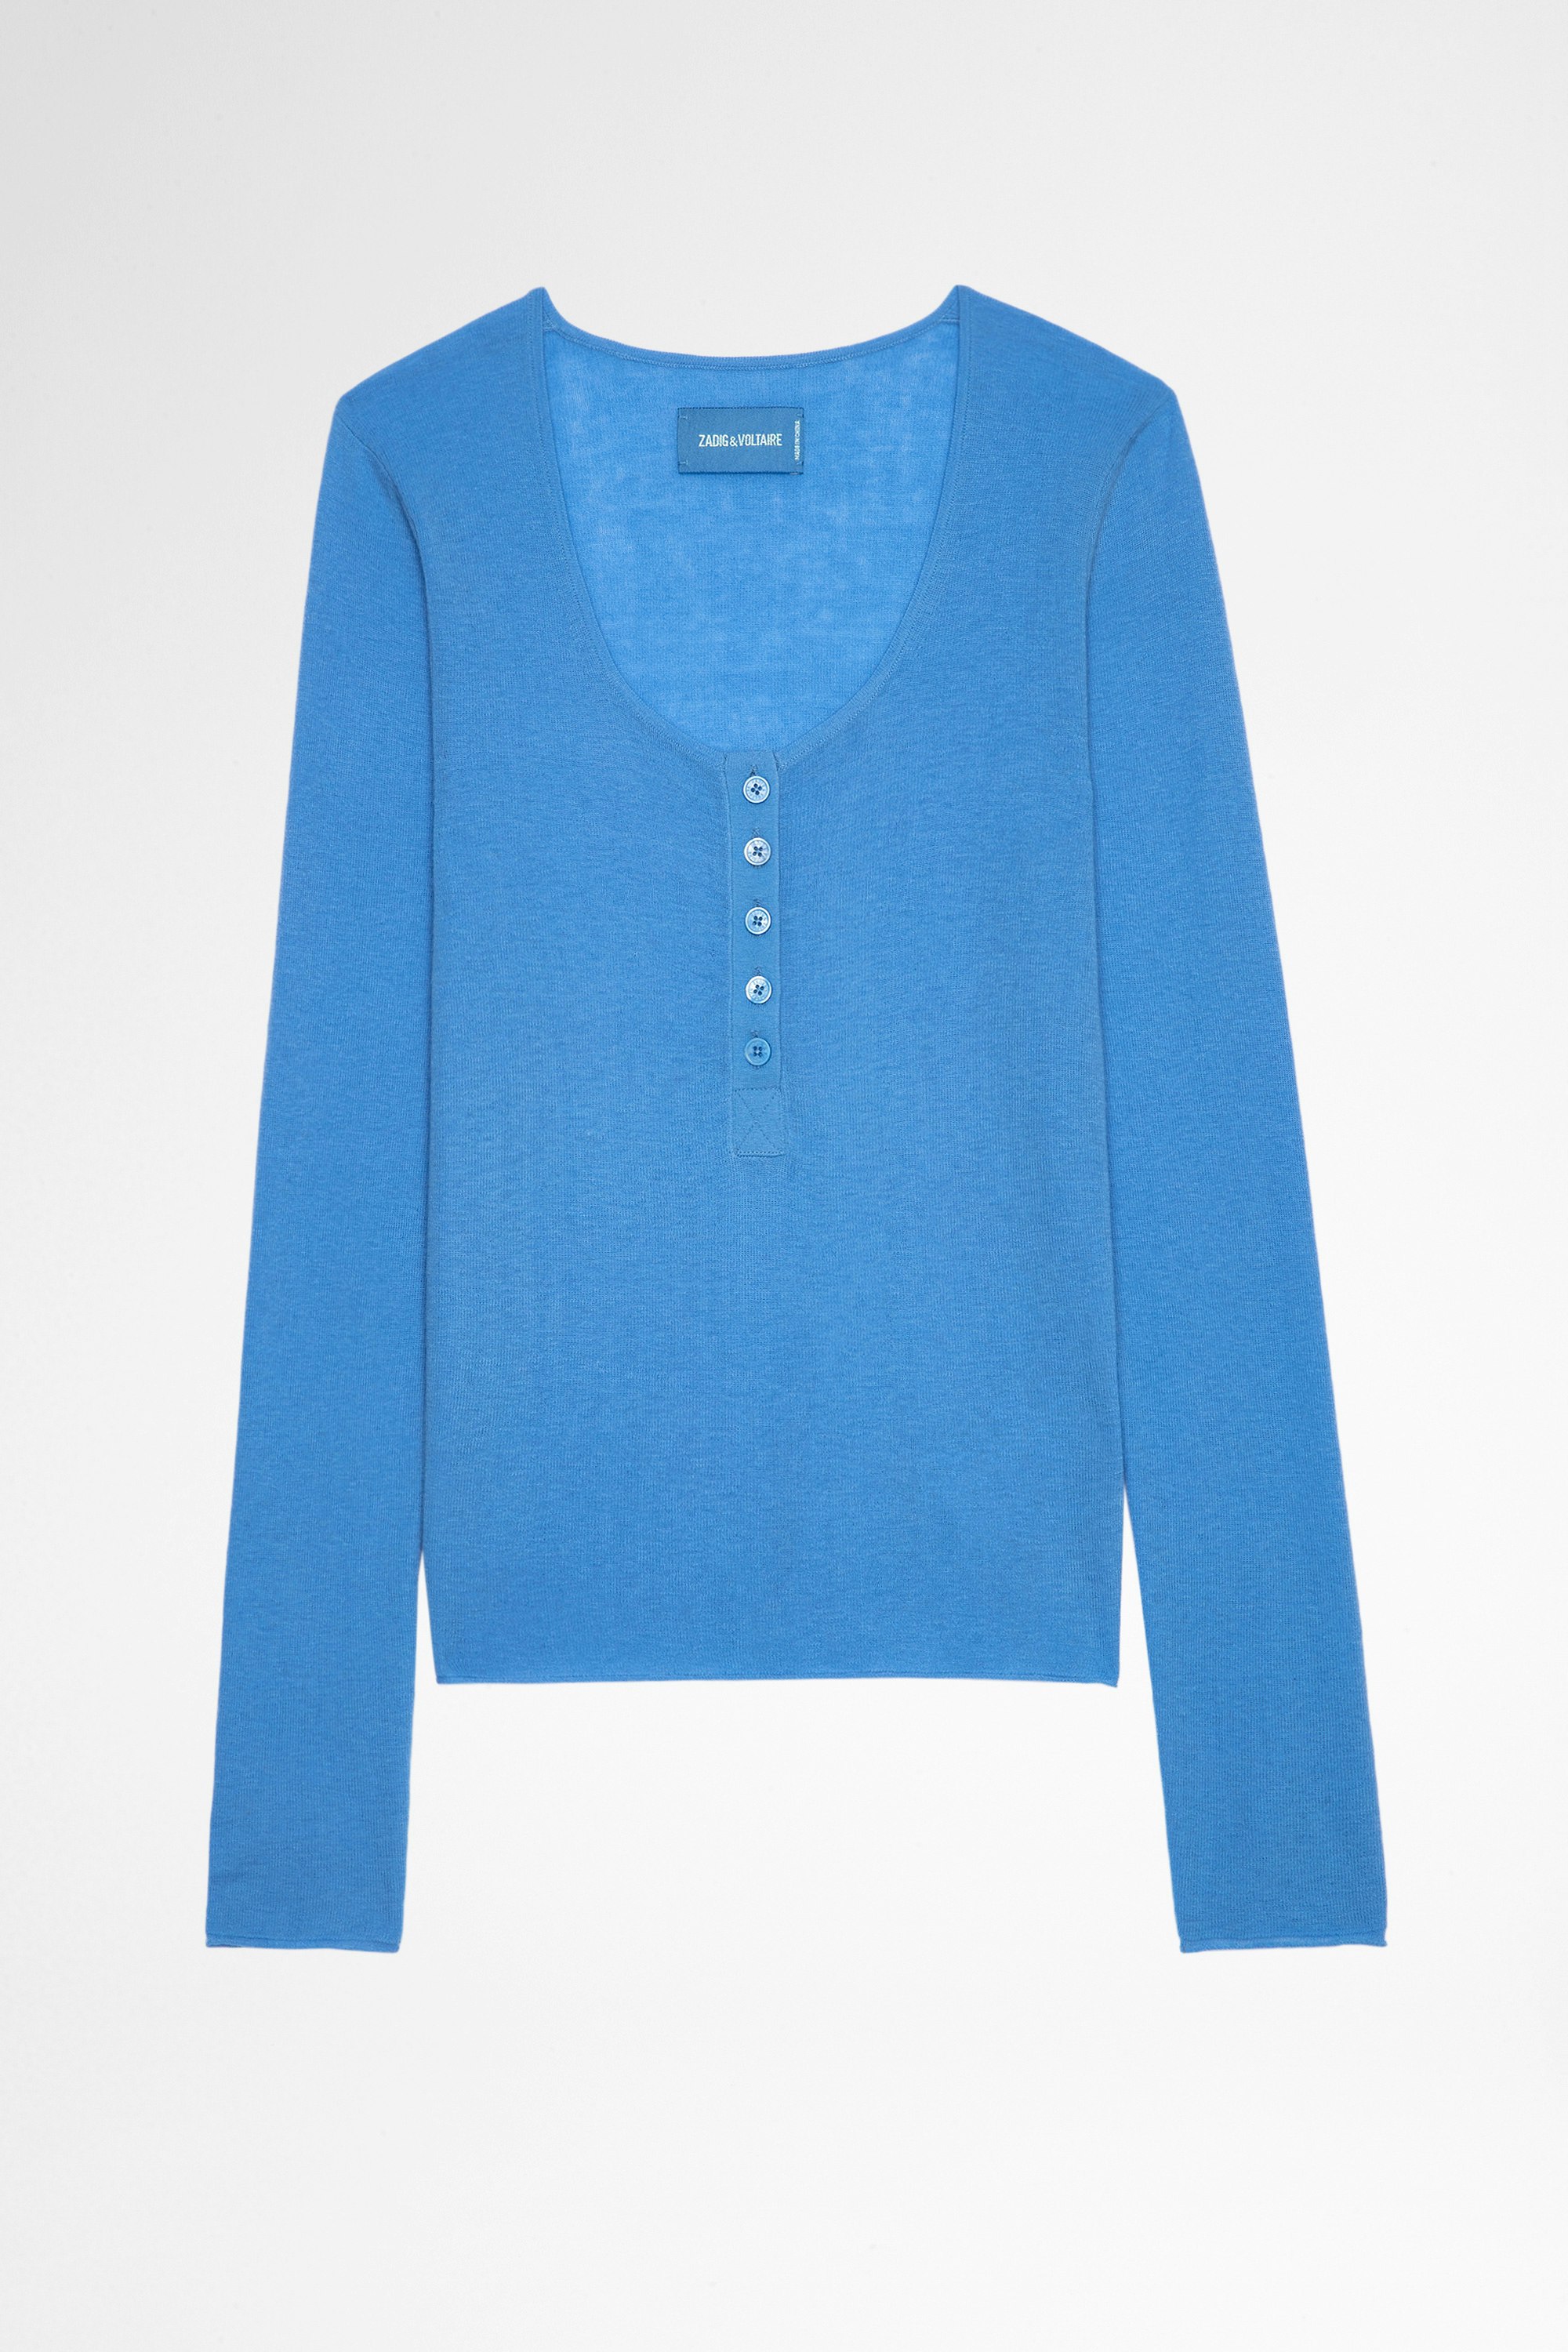 Mila Jumper Women's fine knit jumper with button-down collar and long sleeves in blue